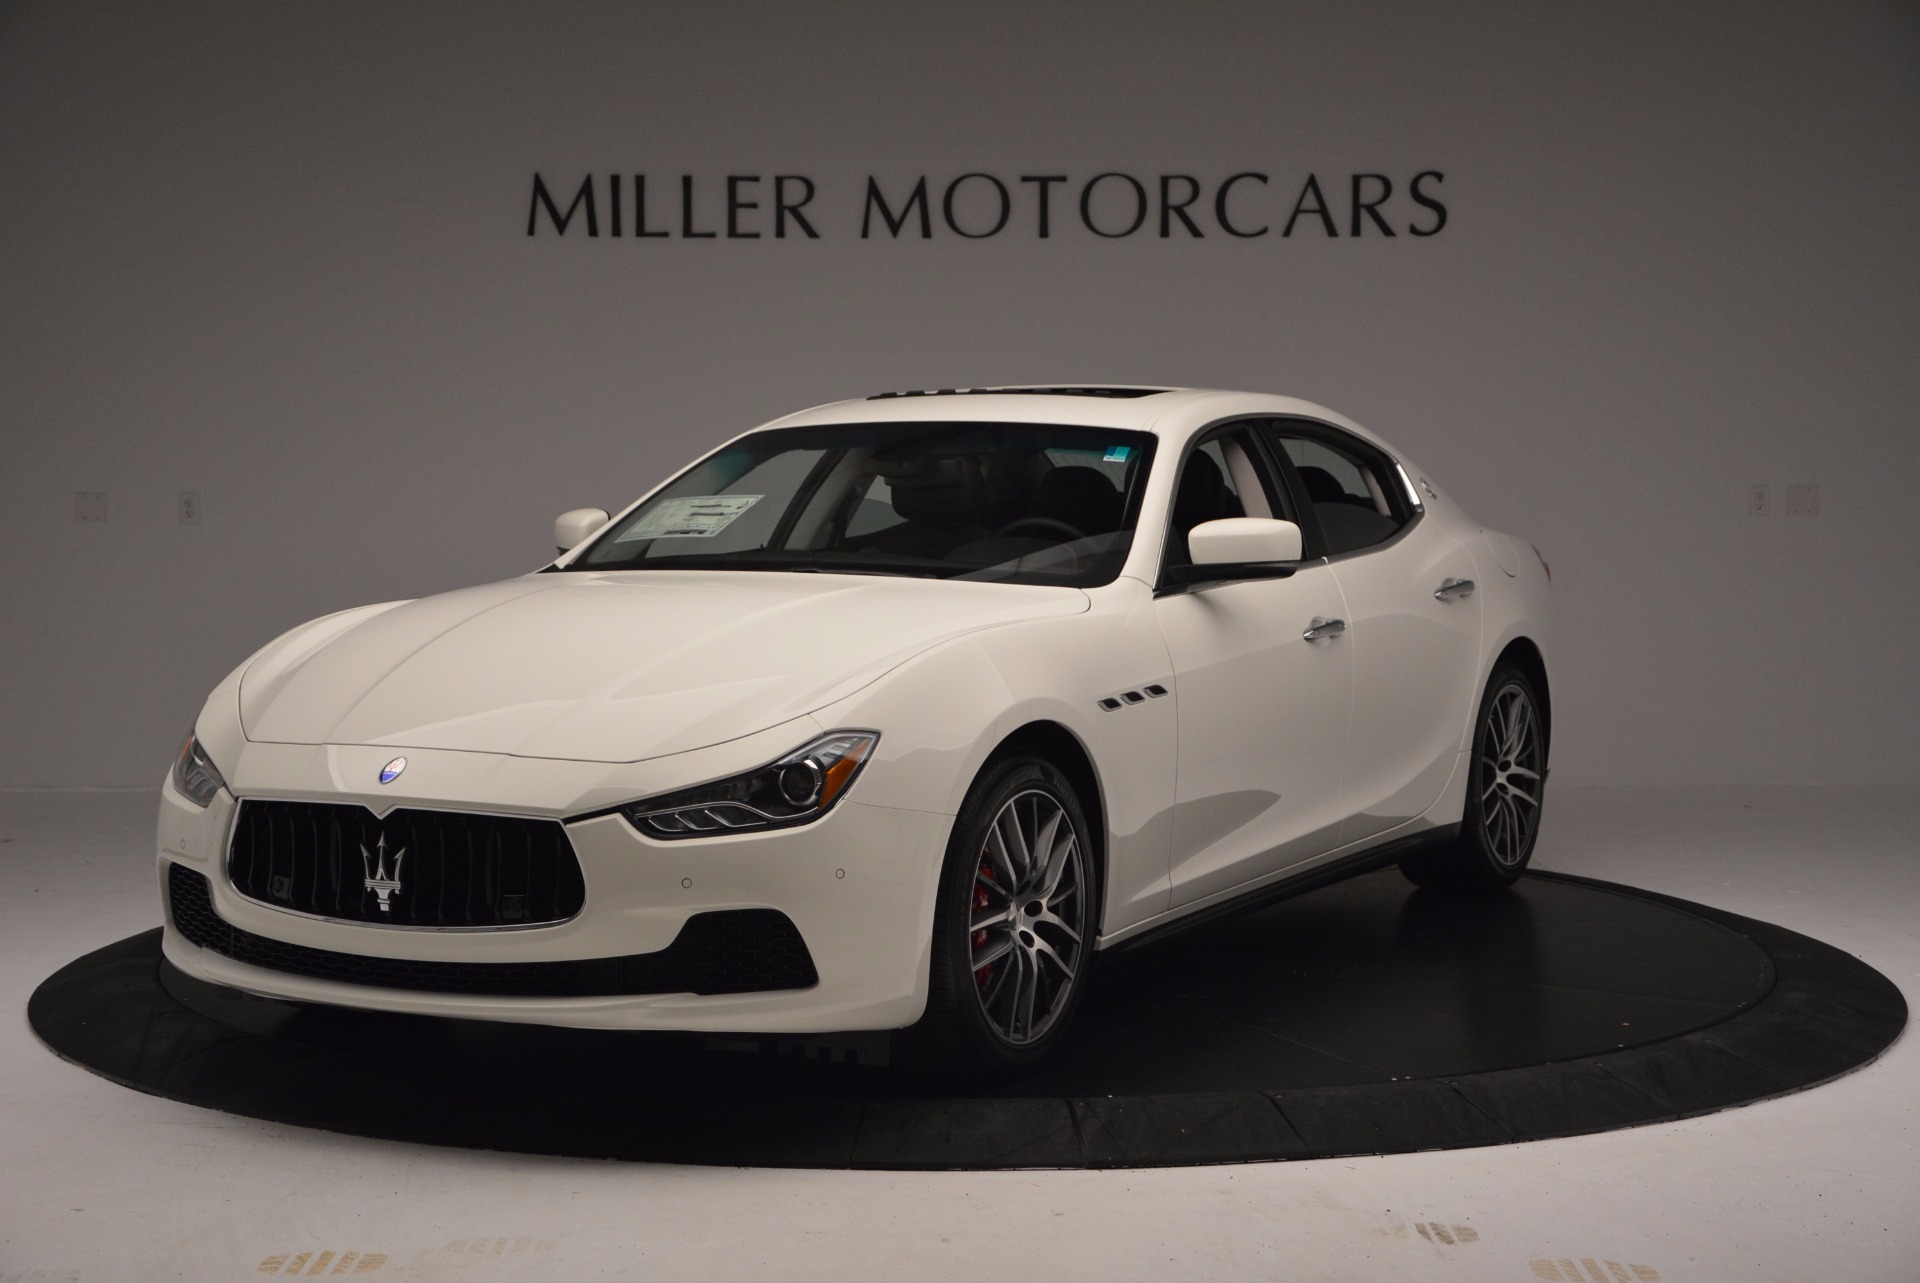 Used 2017 Maserati Ghibli S Q4 for sale Sold at Maserati of Greenwich in Greenwich CT 06830 1